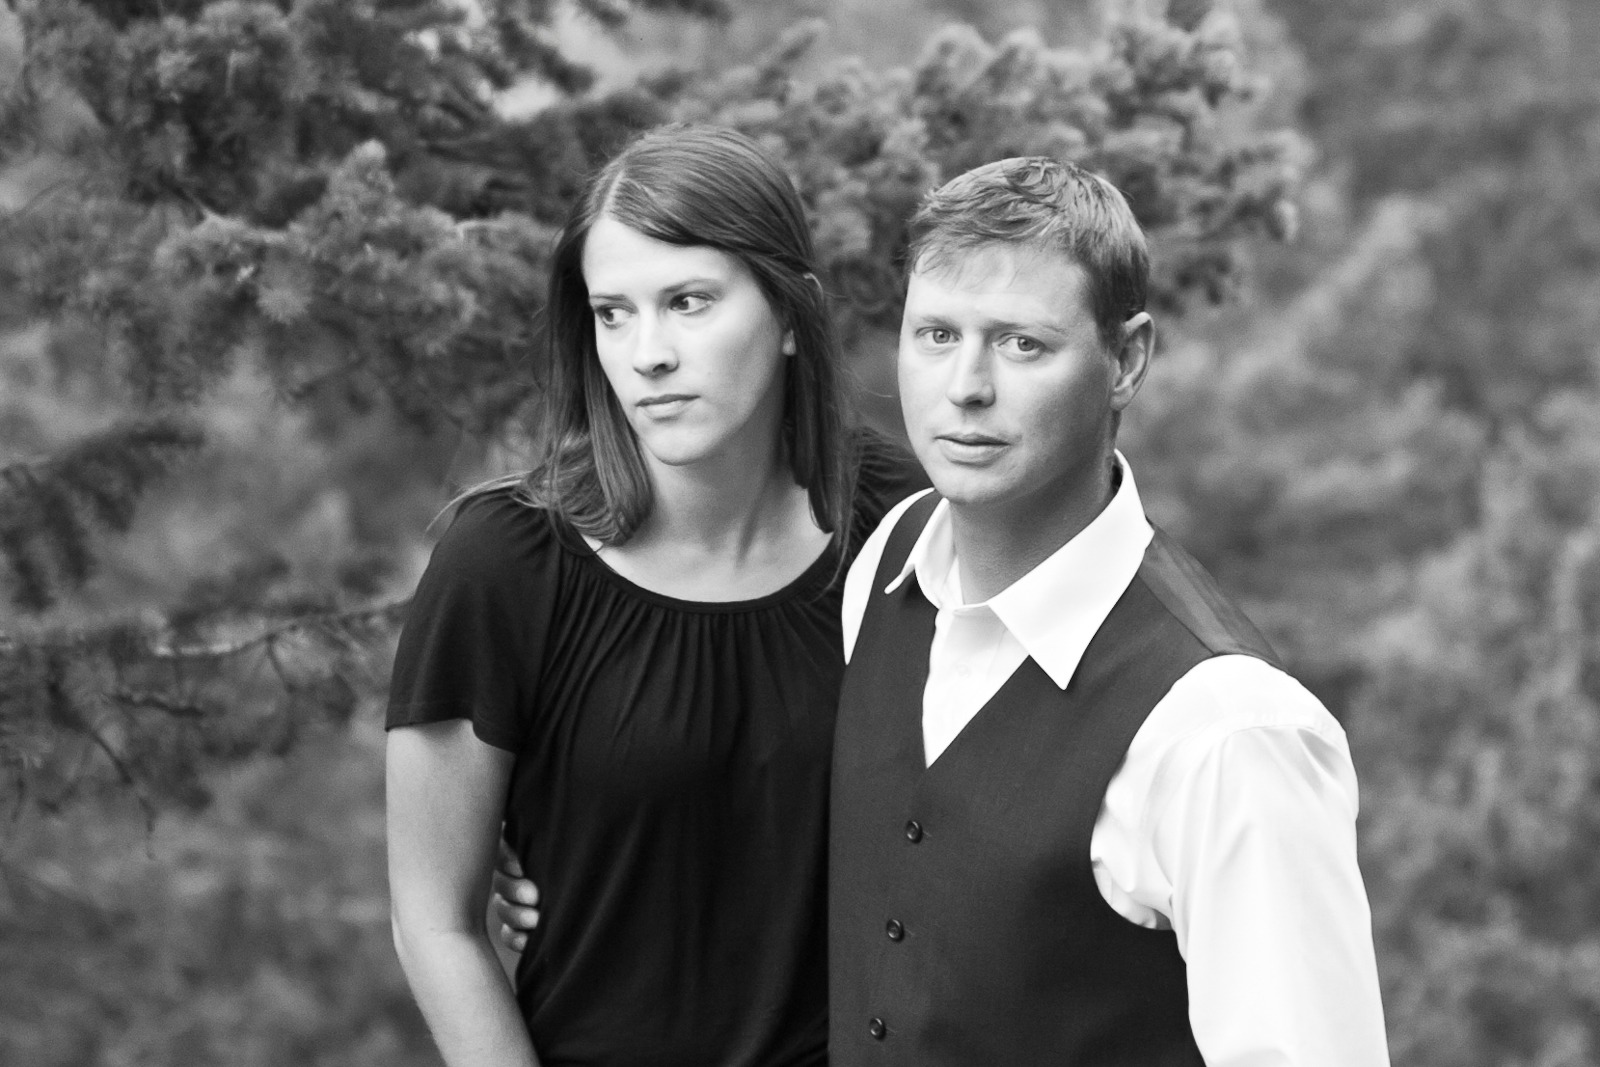 a black and white image of an engaged couple looking serious while standing in front of pine branches